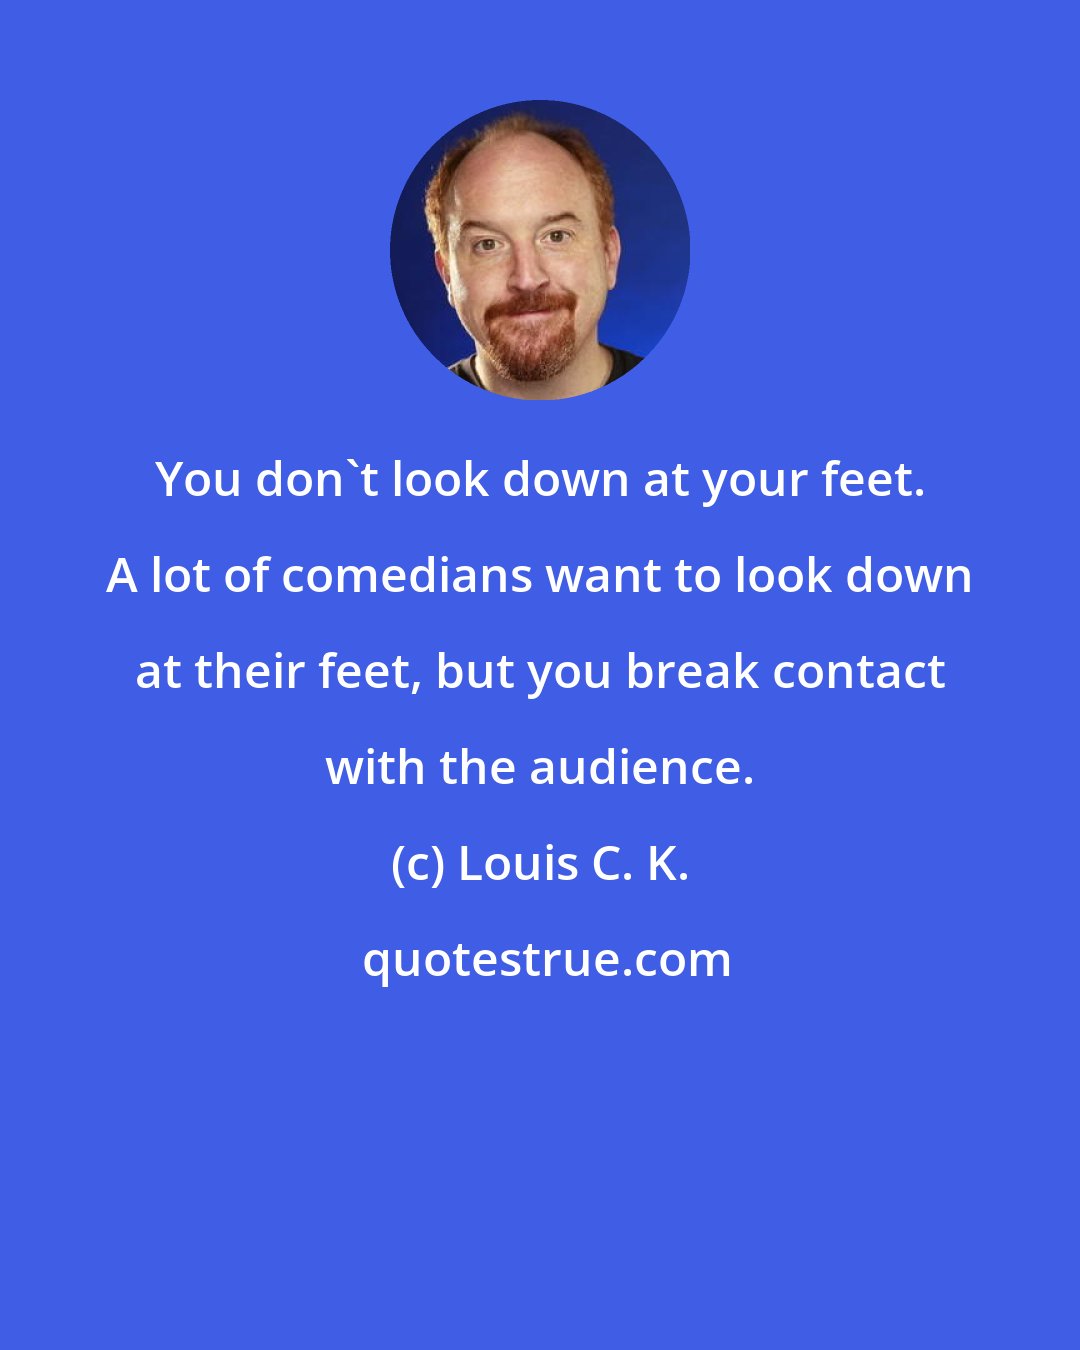 Louis C. K.: You don't look down at your feet. A lot of comedians want to look down at their feet, but you break contact with the audience.